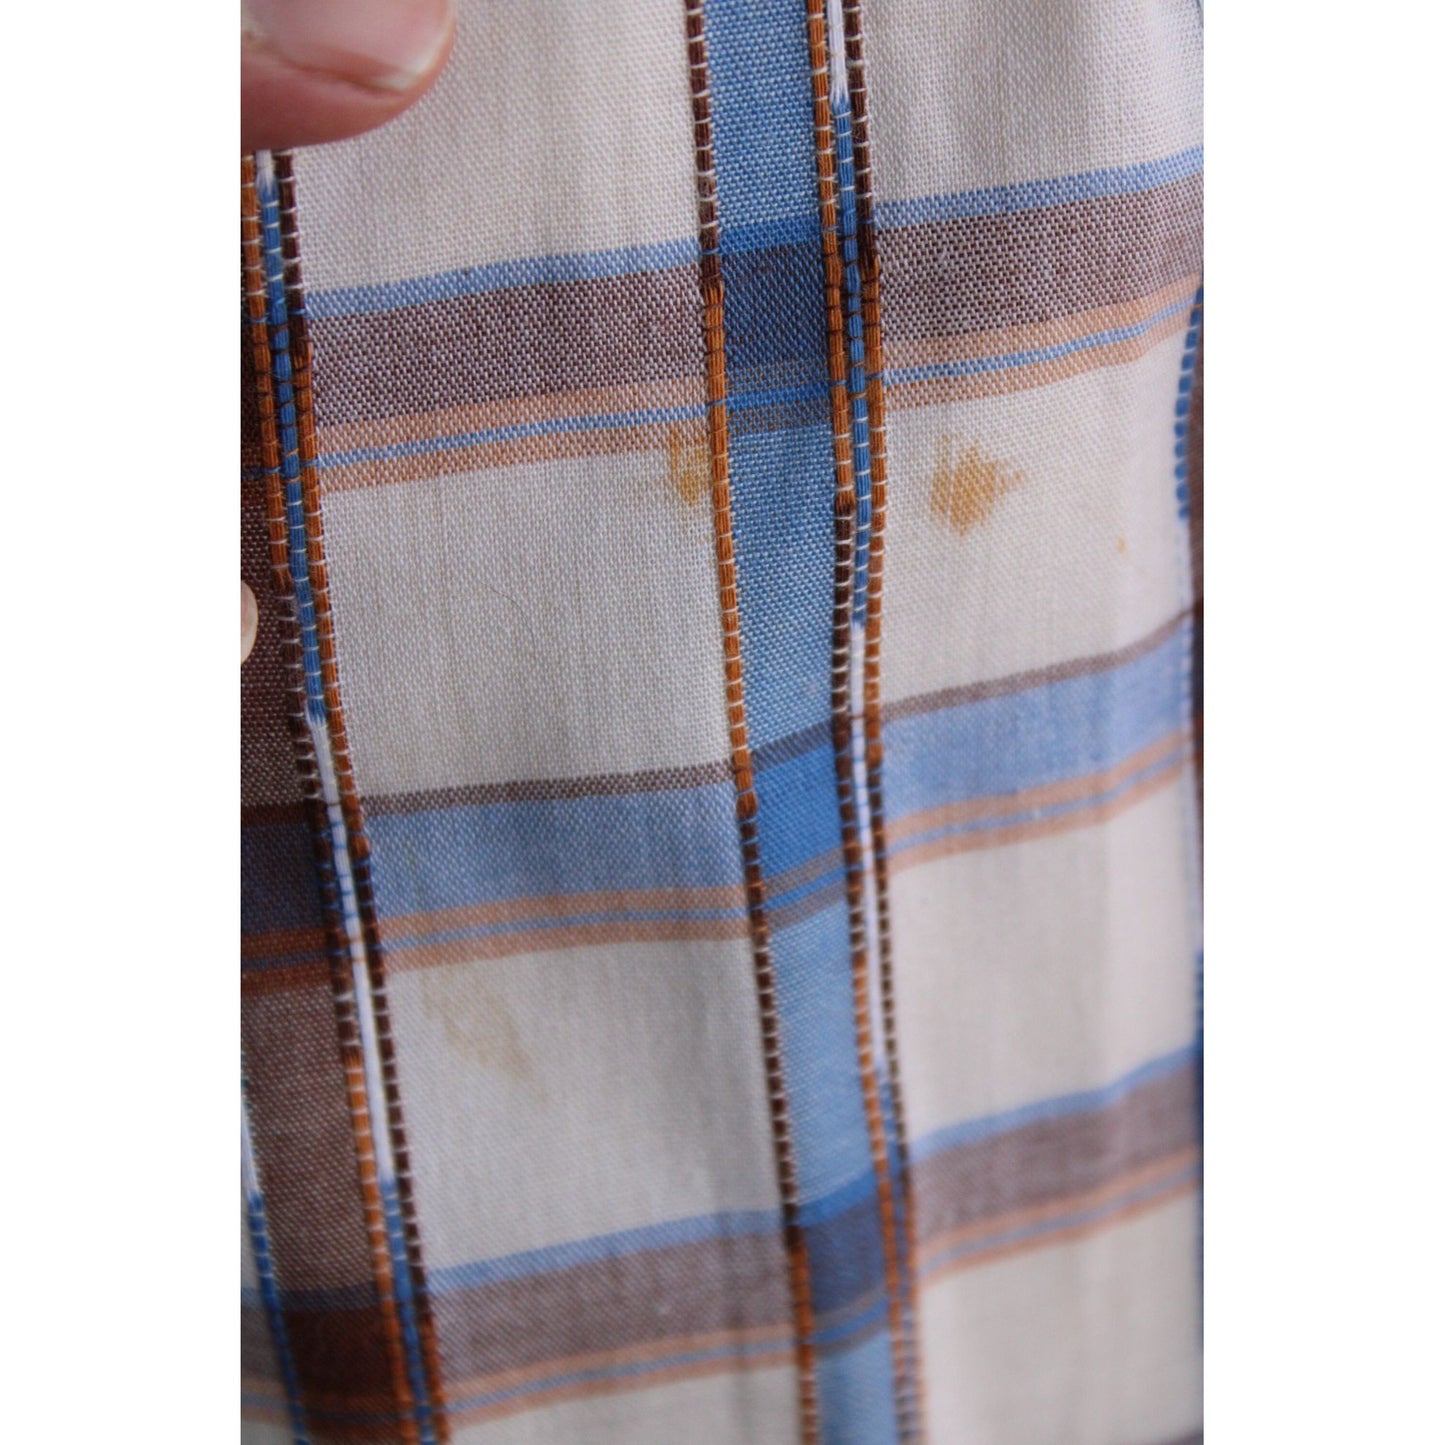 Vintage 1960s 1970s Plaid Blue and Brown Check Full Skirt